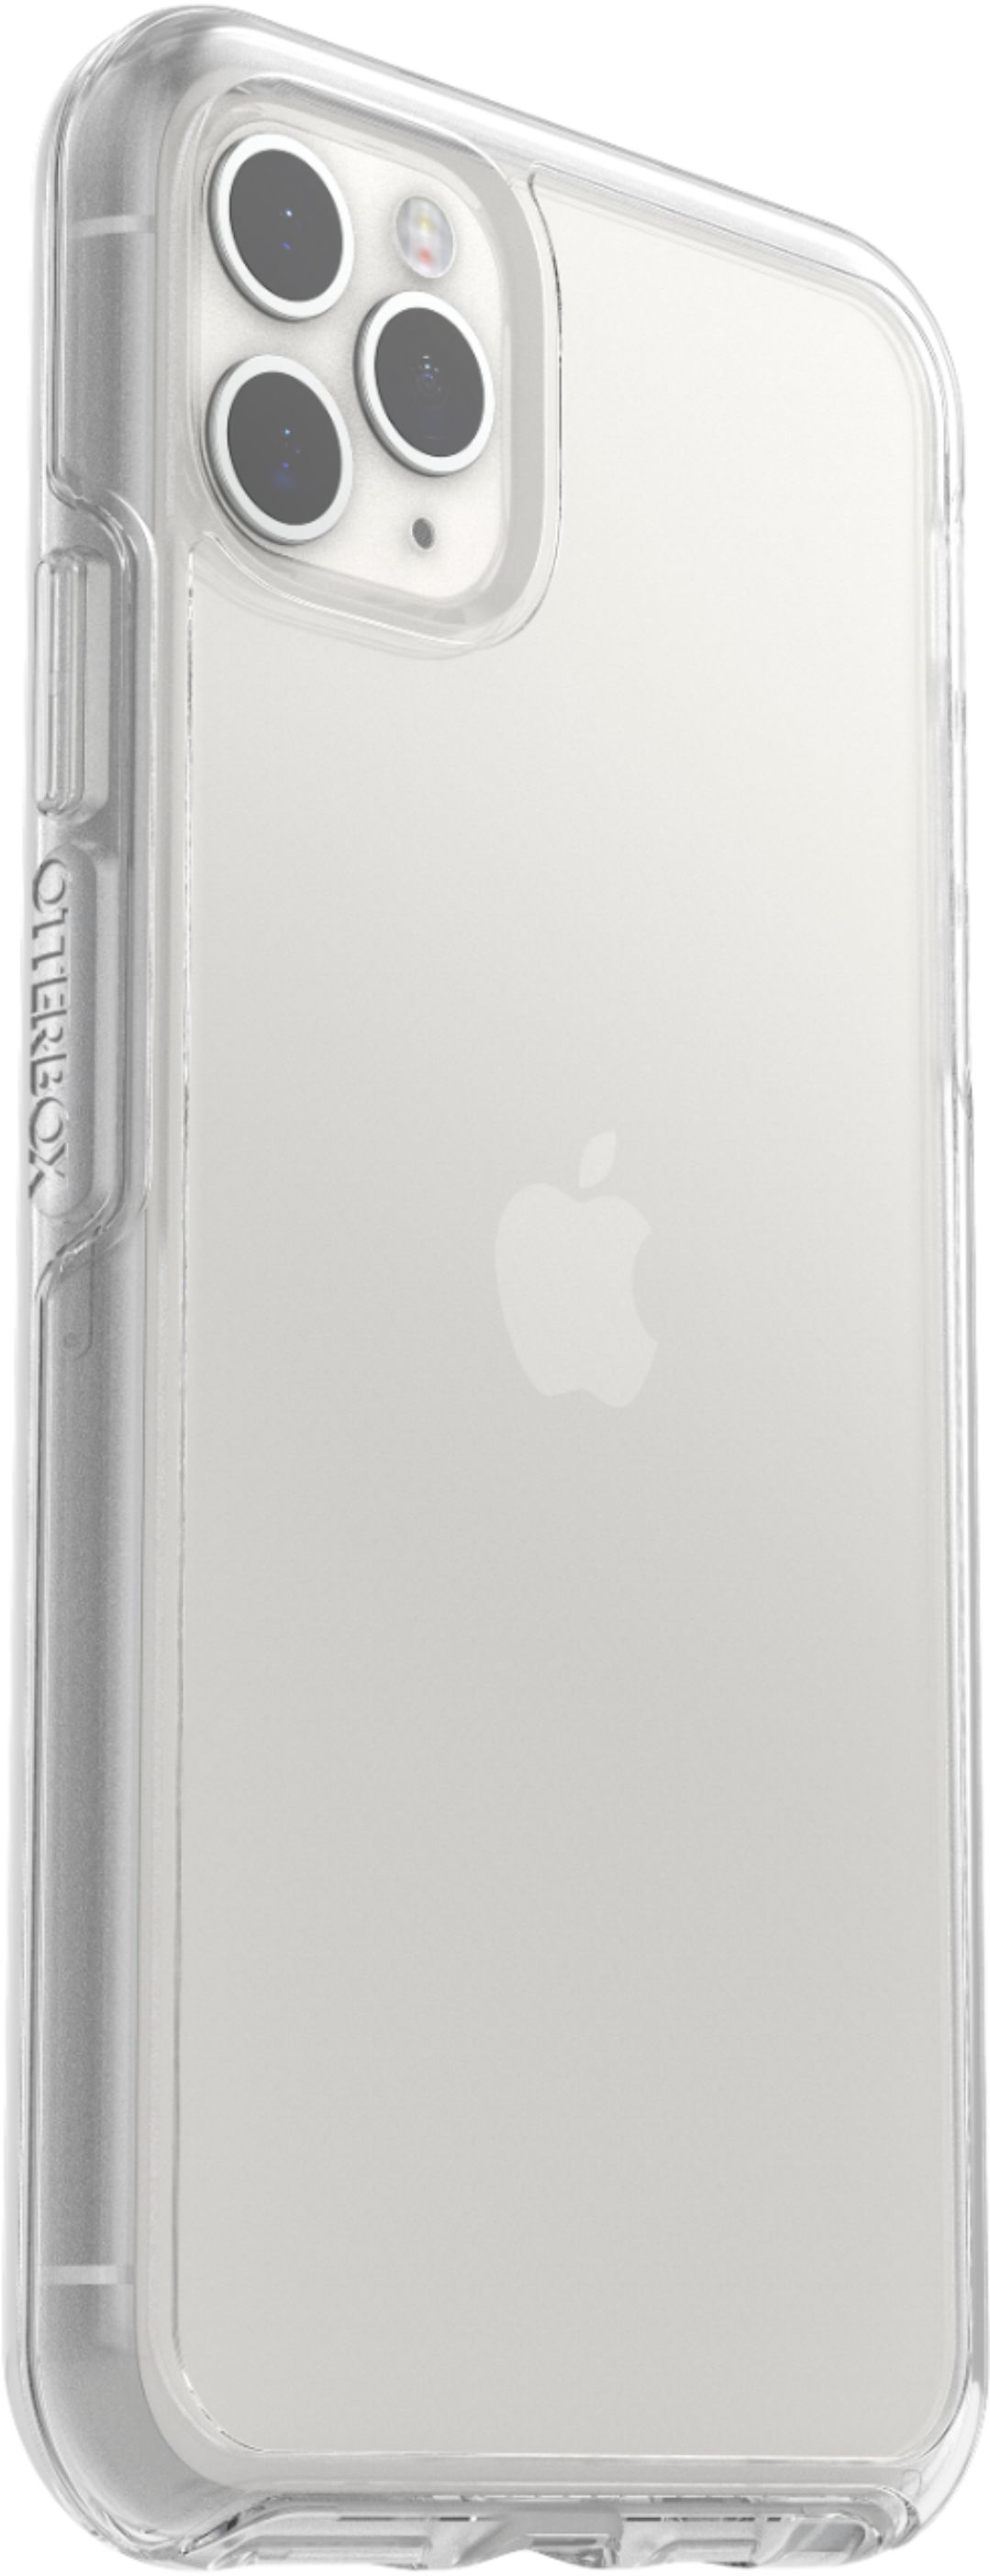 Otterbox Symmetry Series Case For Apple Iphone 11 Pro Max Xs Max Clear 77 Best Buy